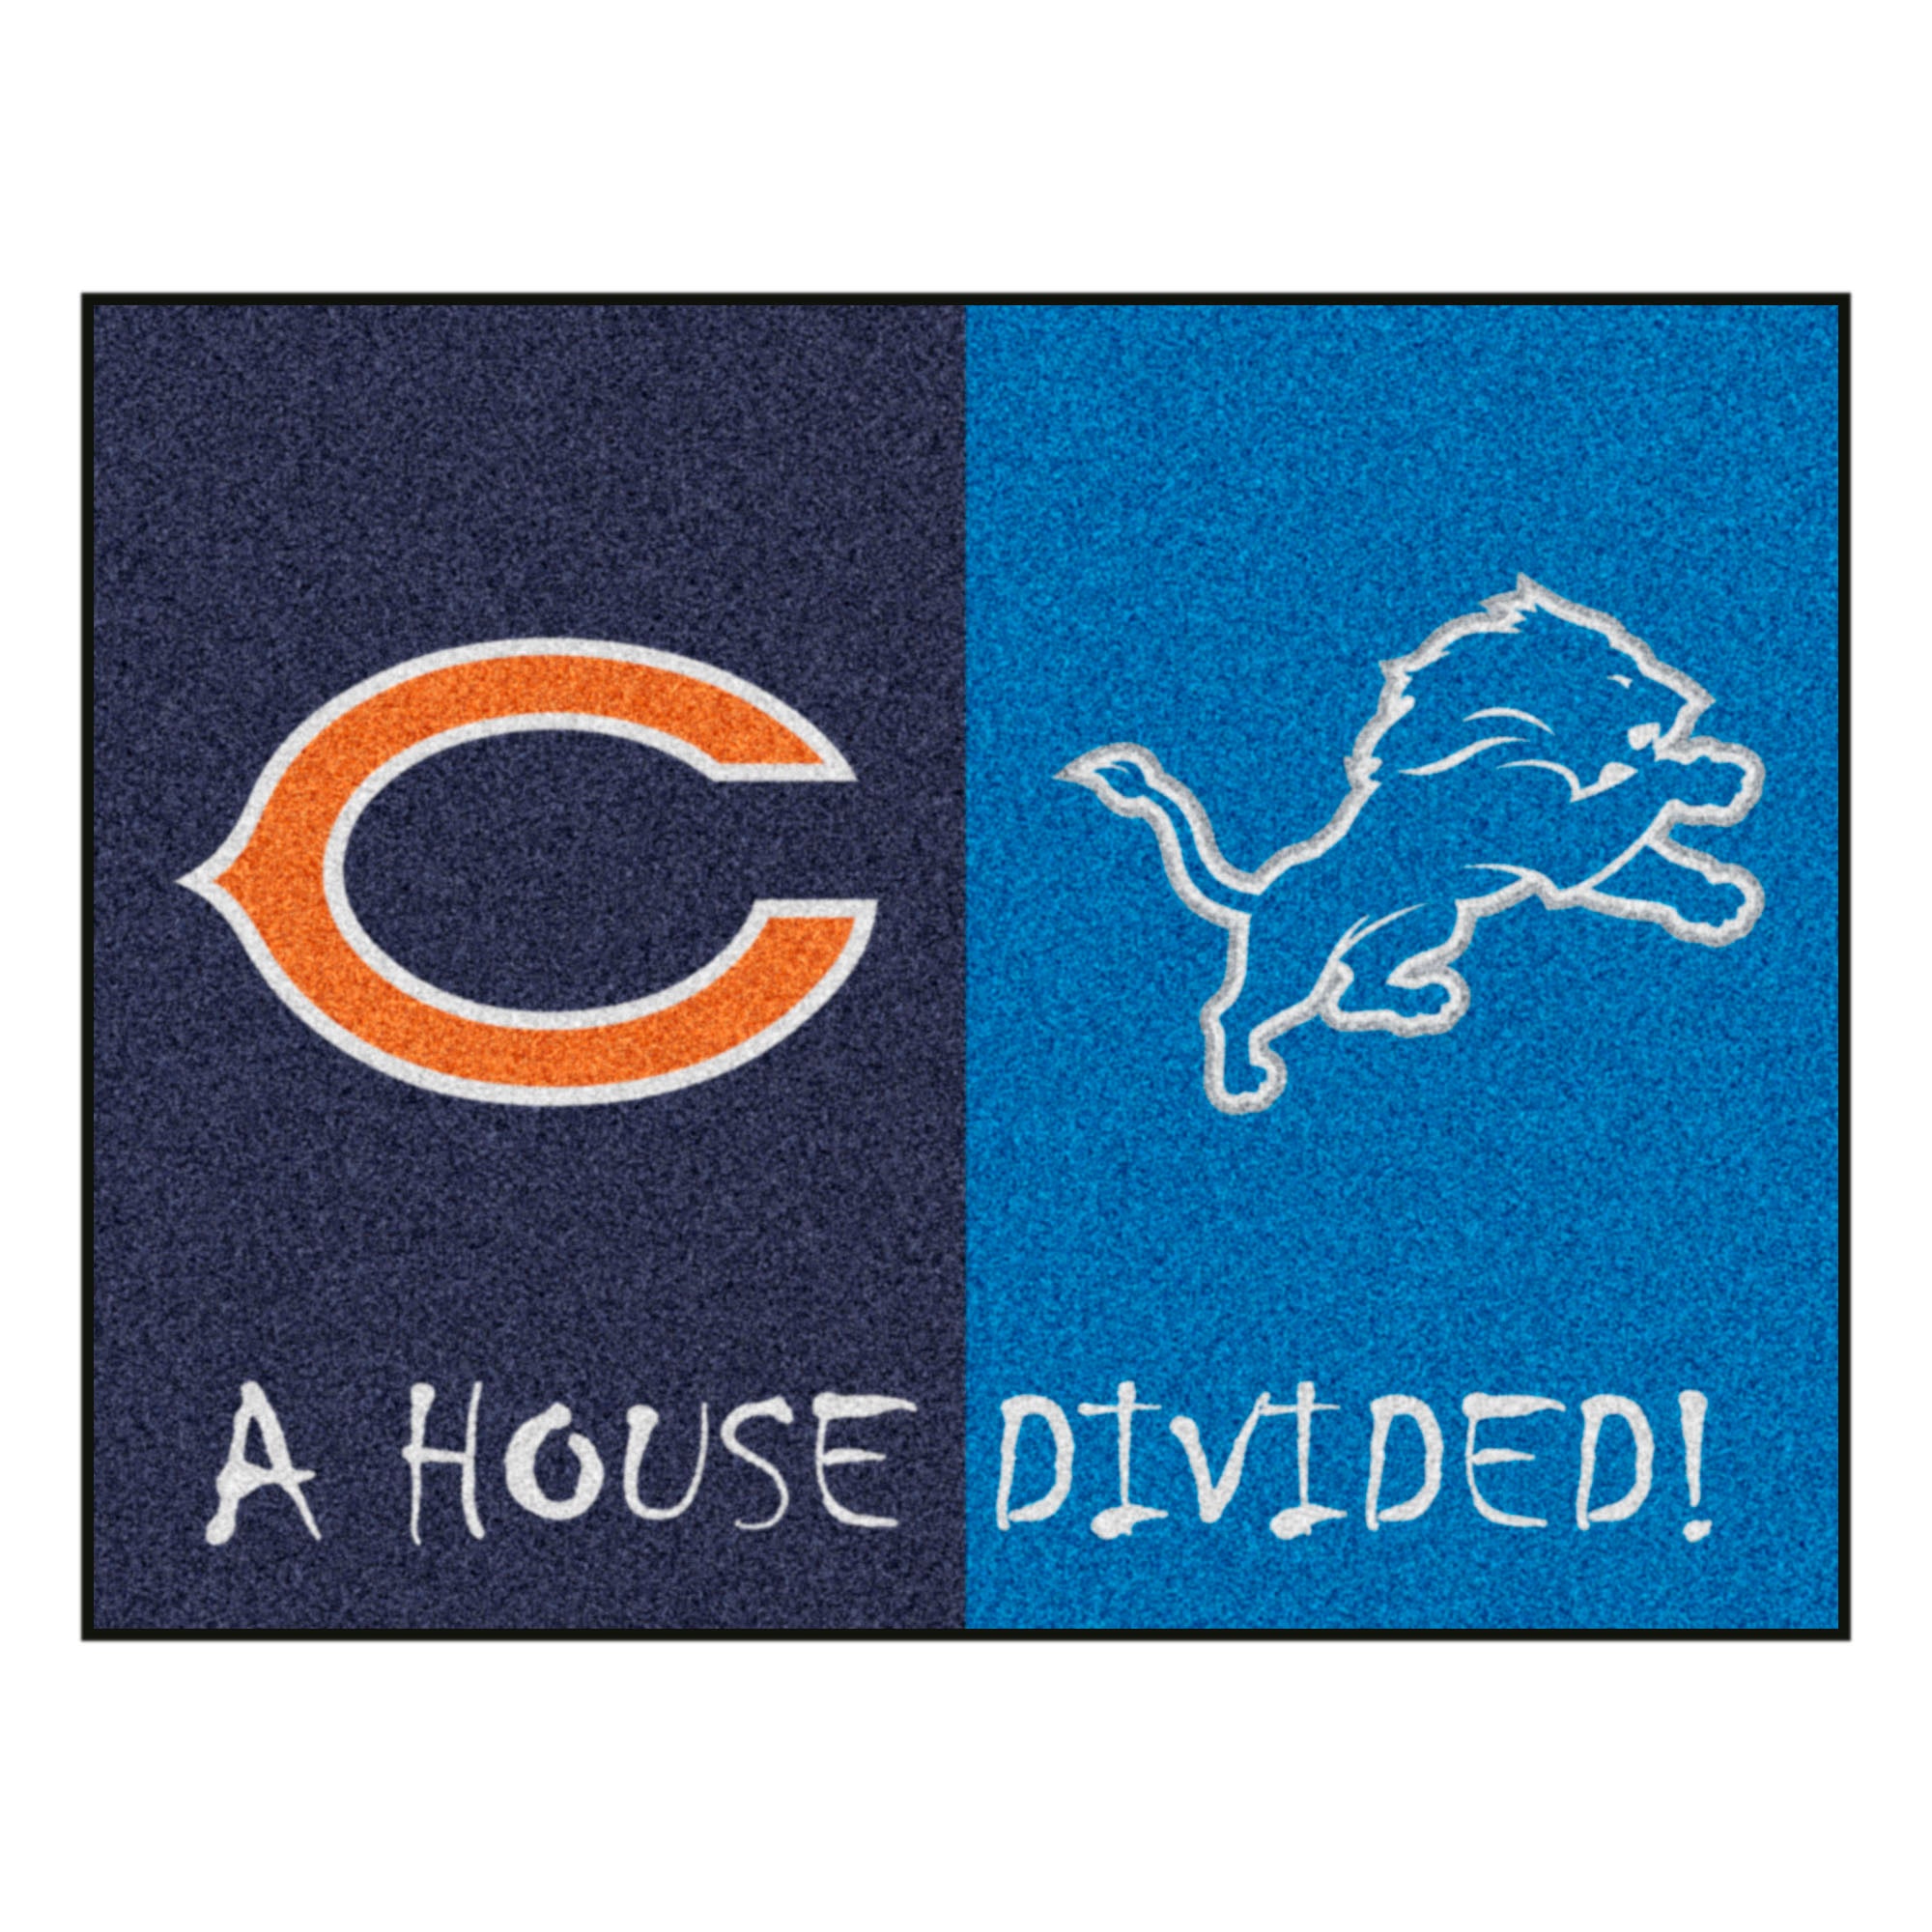 NFL House Divided - Bears / Lions House Divided Mat